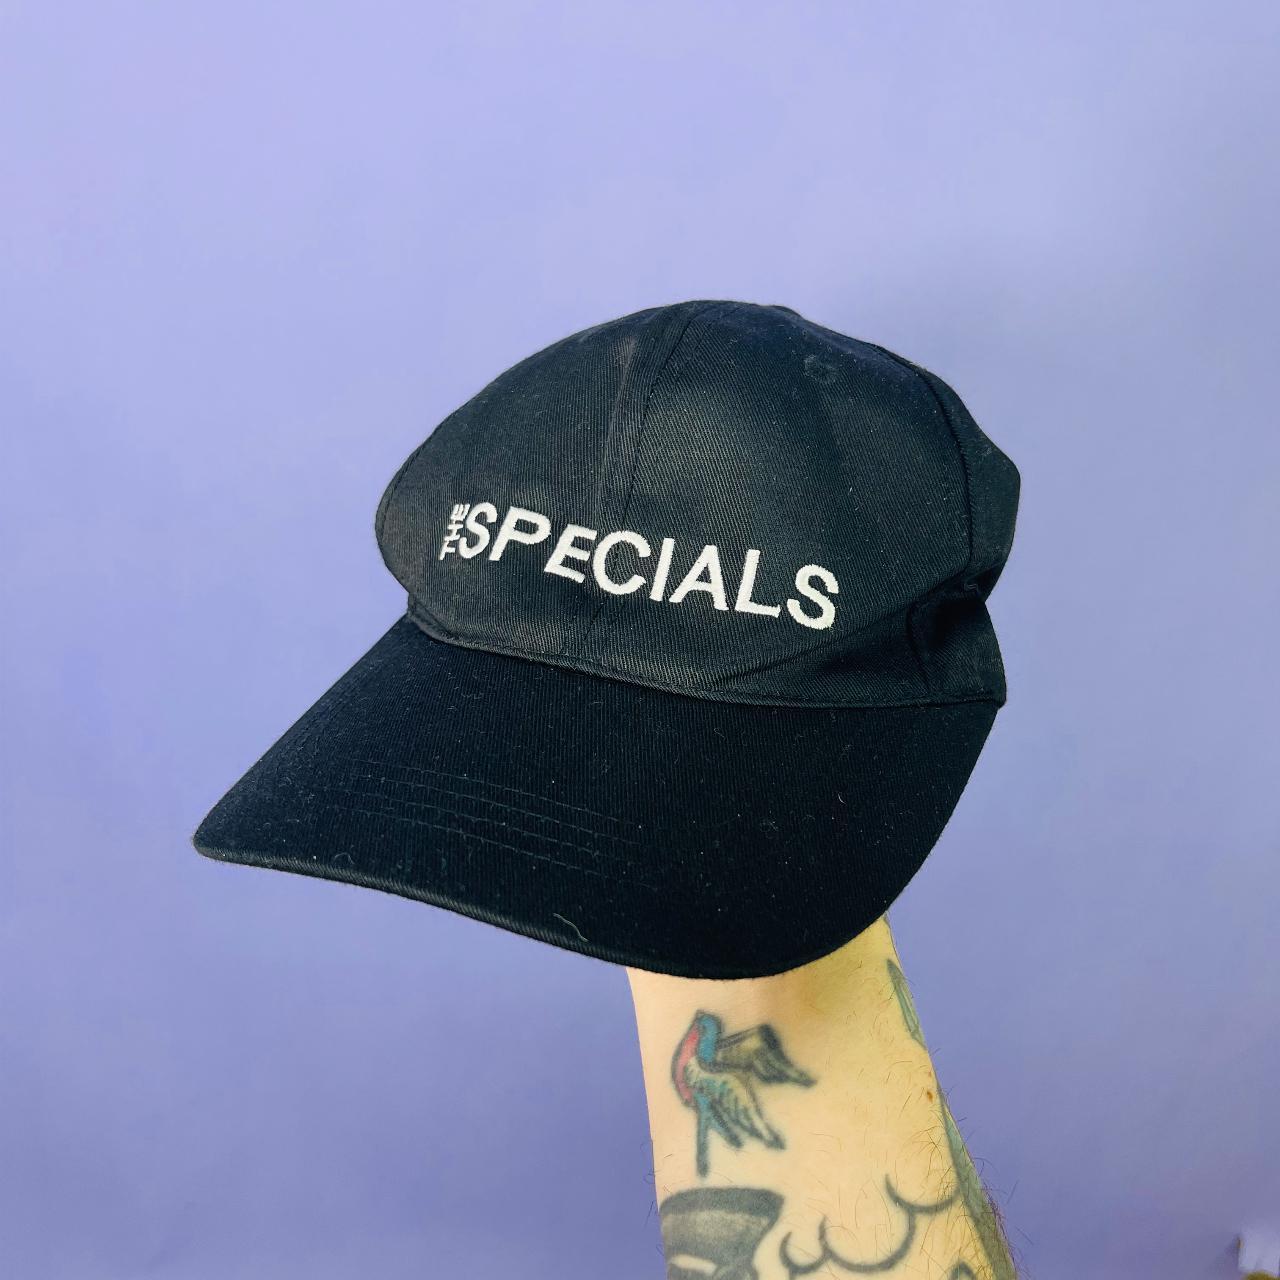 Vintage 90s The Specials Band Merch Embroidered Hat... - Depop